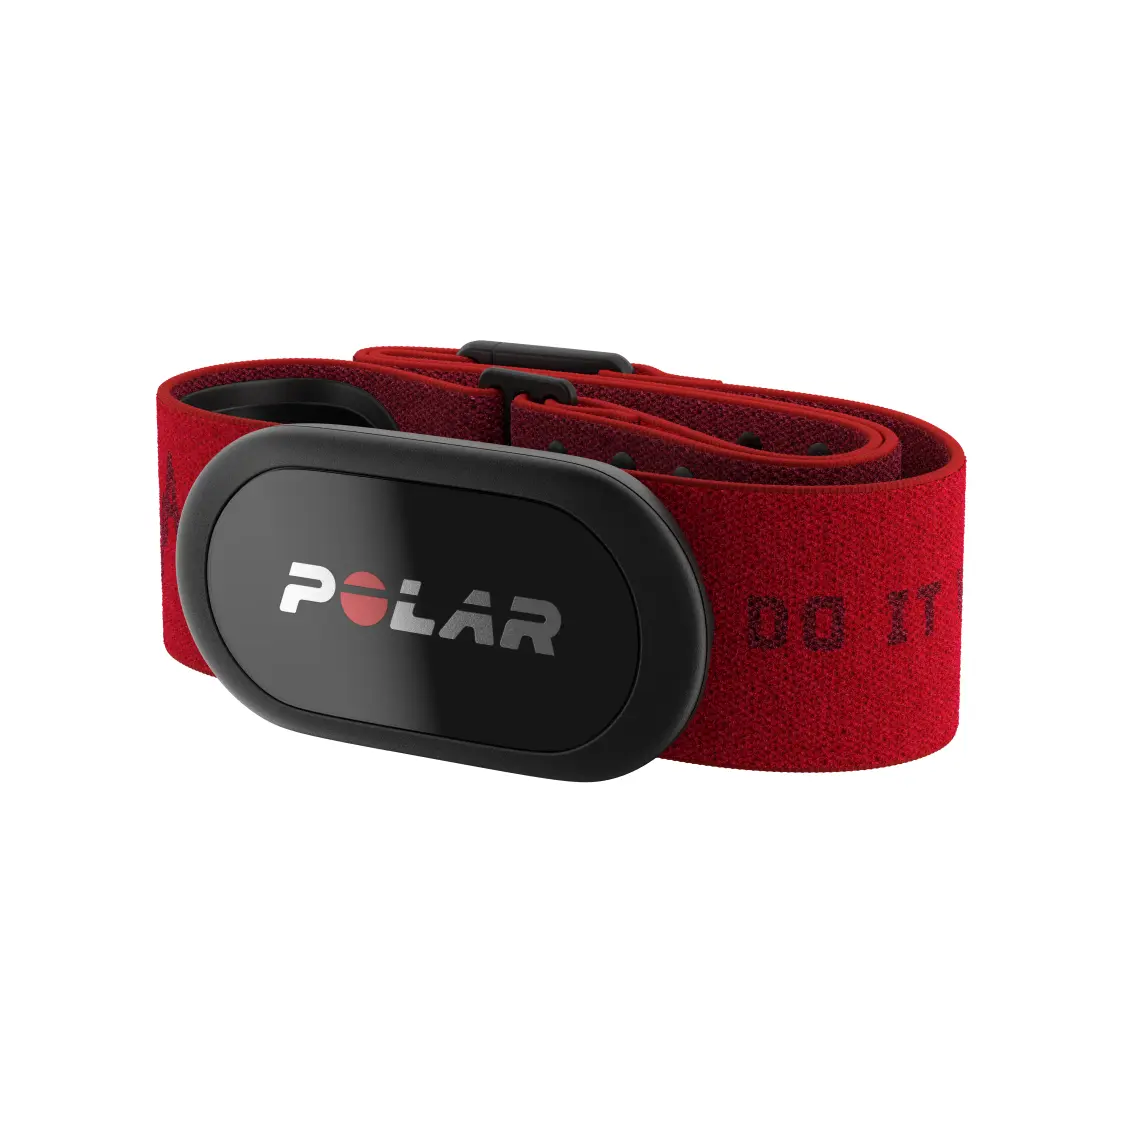 Polar's New H9 Heart Rate Strap: Everything you ever wanted to know